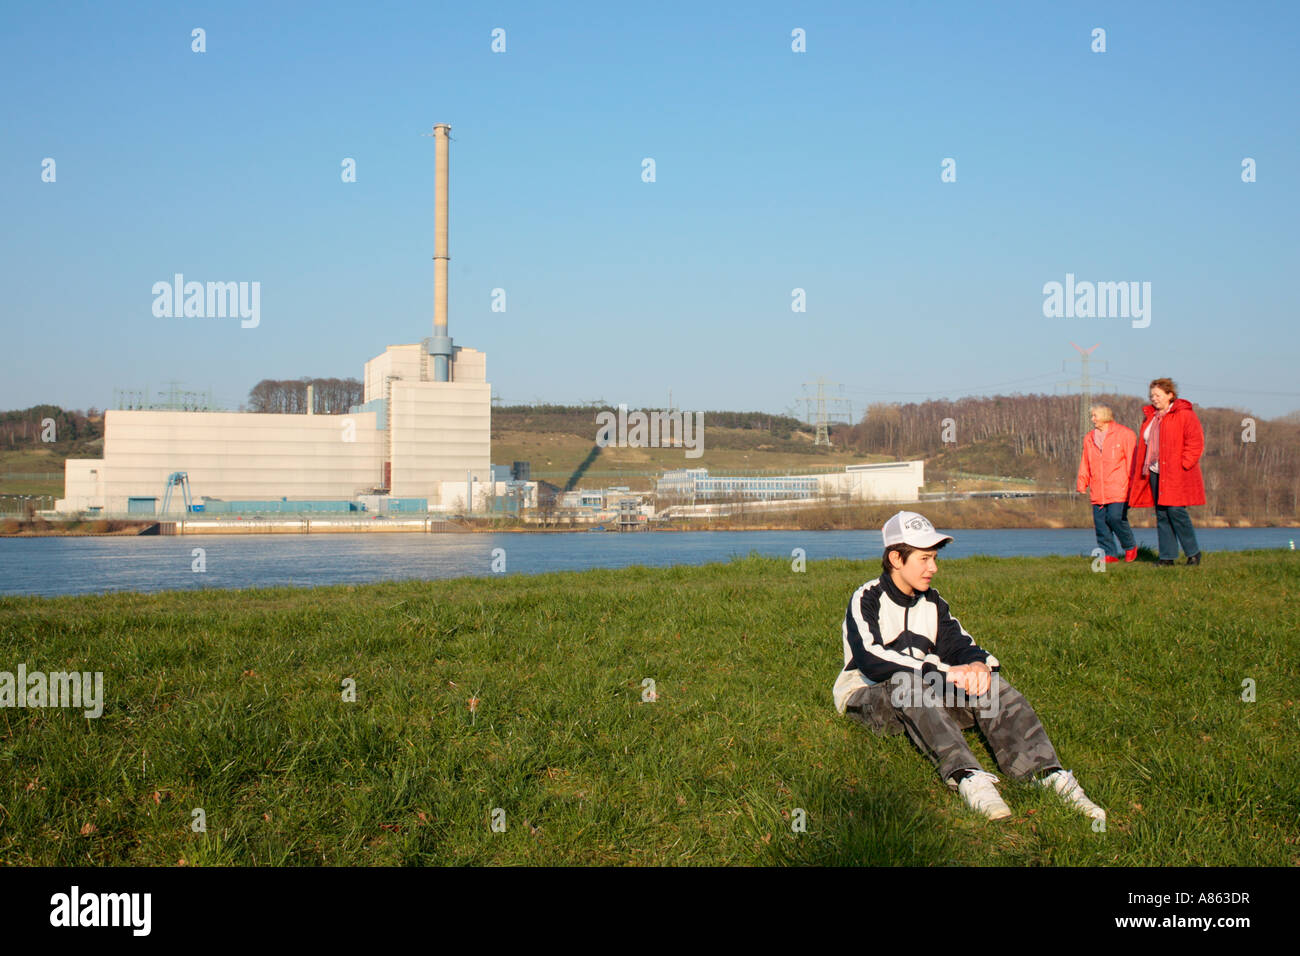 nuclear power station Kruemmel beside the River Elbe near Geesthacht in Northern Germany Stock Photo